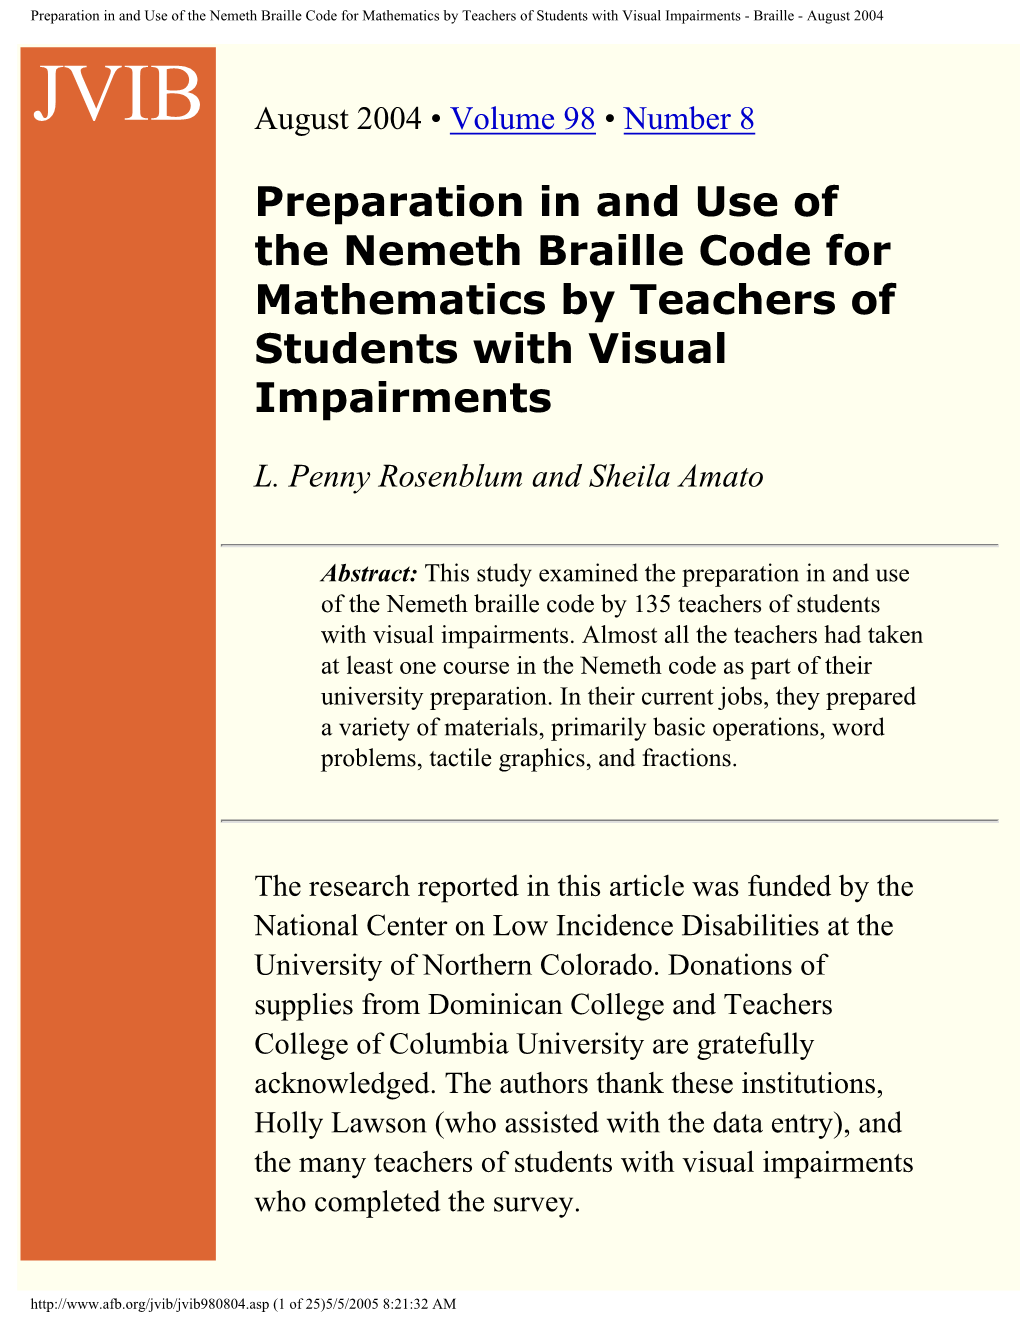 Preparation in and Use of the Nemeth Braille Code for Mathematics by Teachers of Students with Visual Impairments - Braille - August 2004